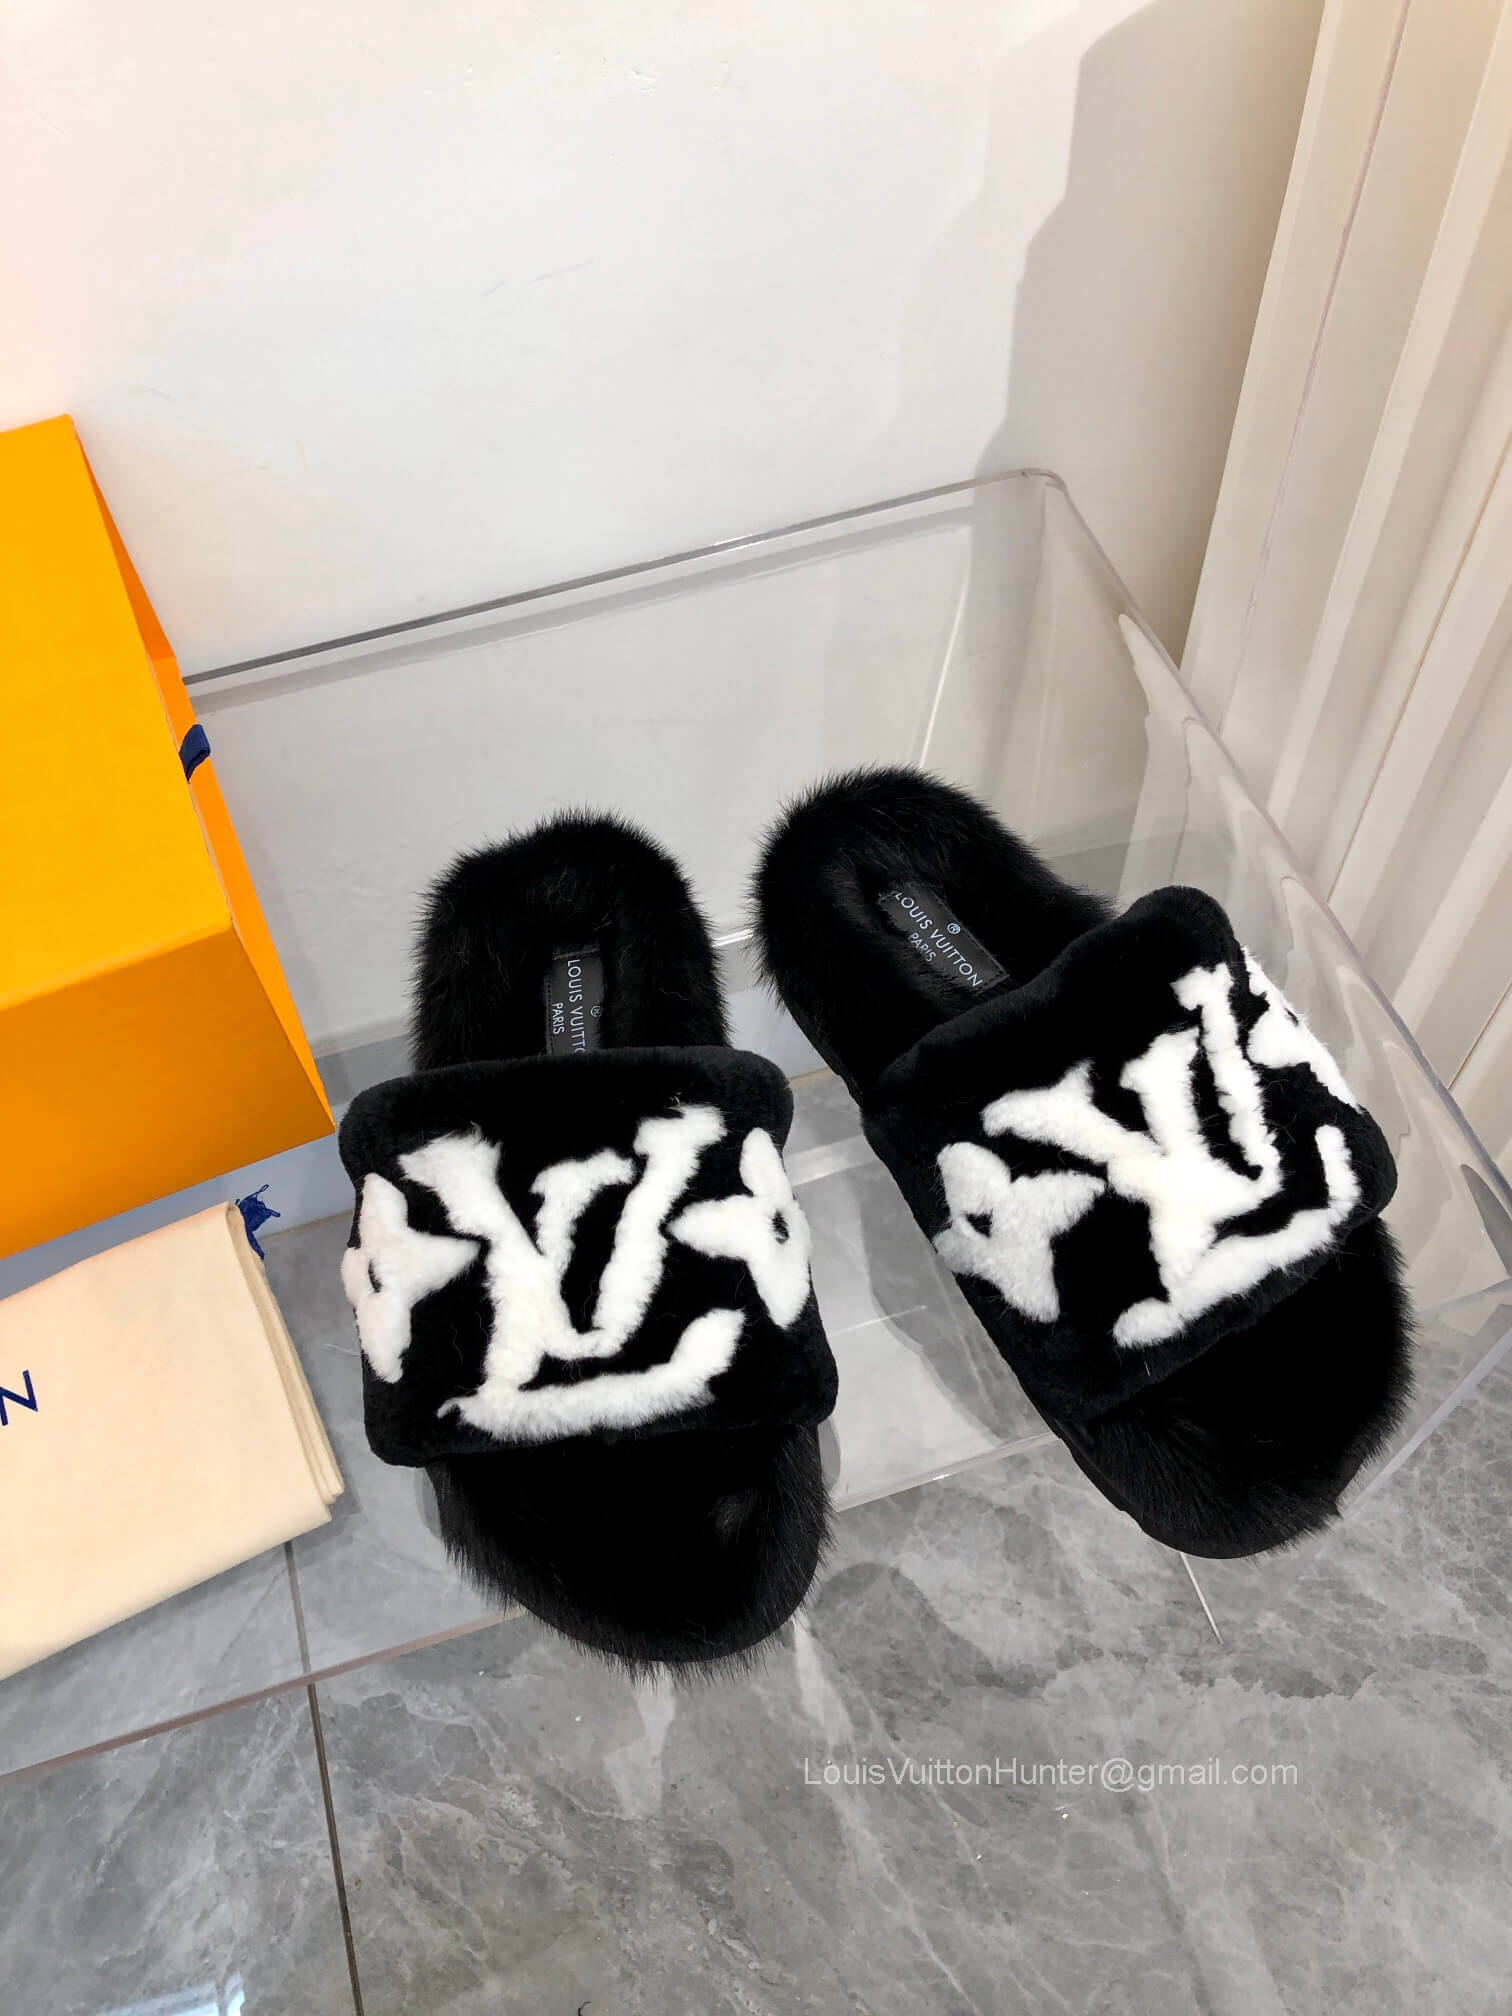 Louis Vuitton Paseo Flat Comfort Mule Slide Sandal with Shearling in Black 2281674